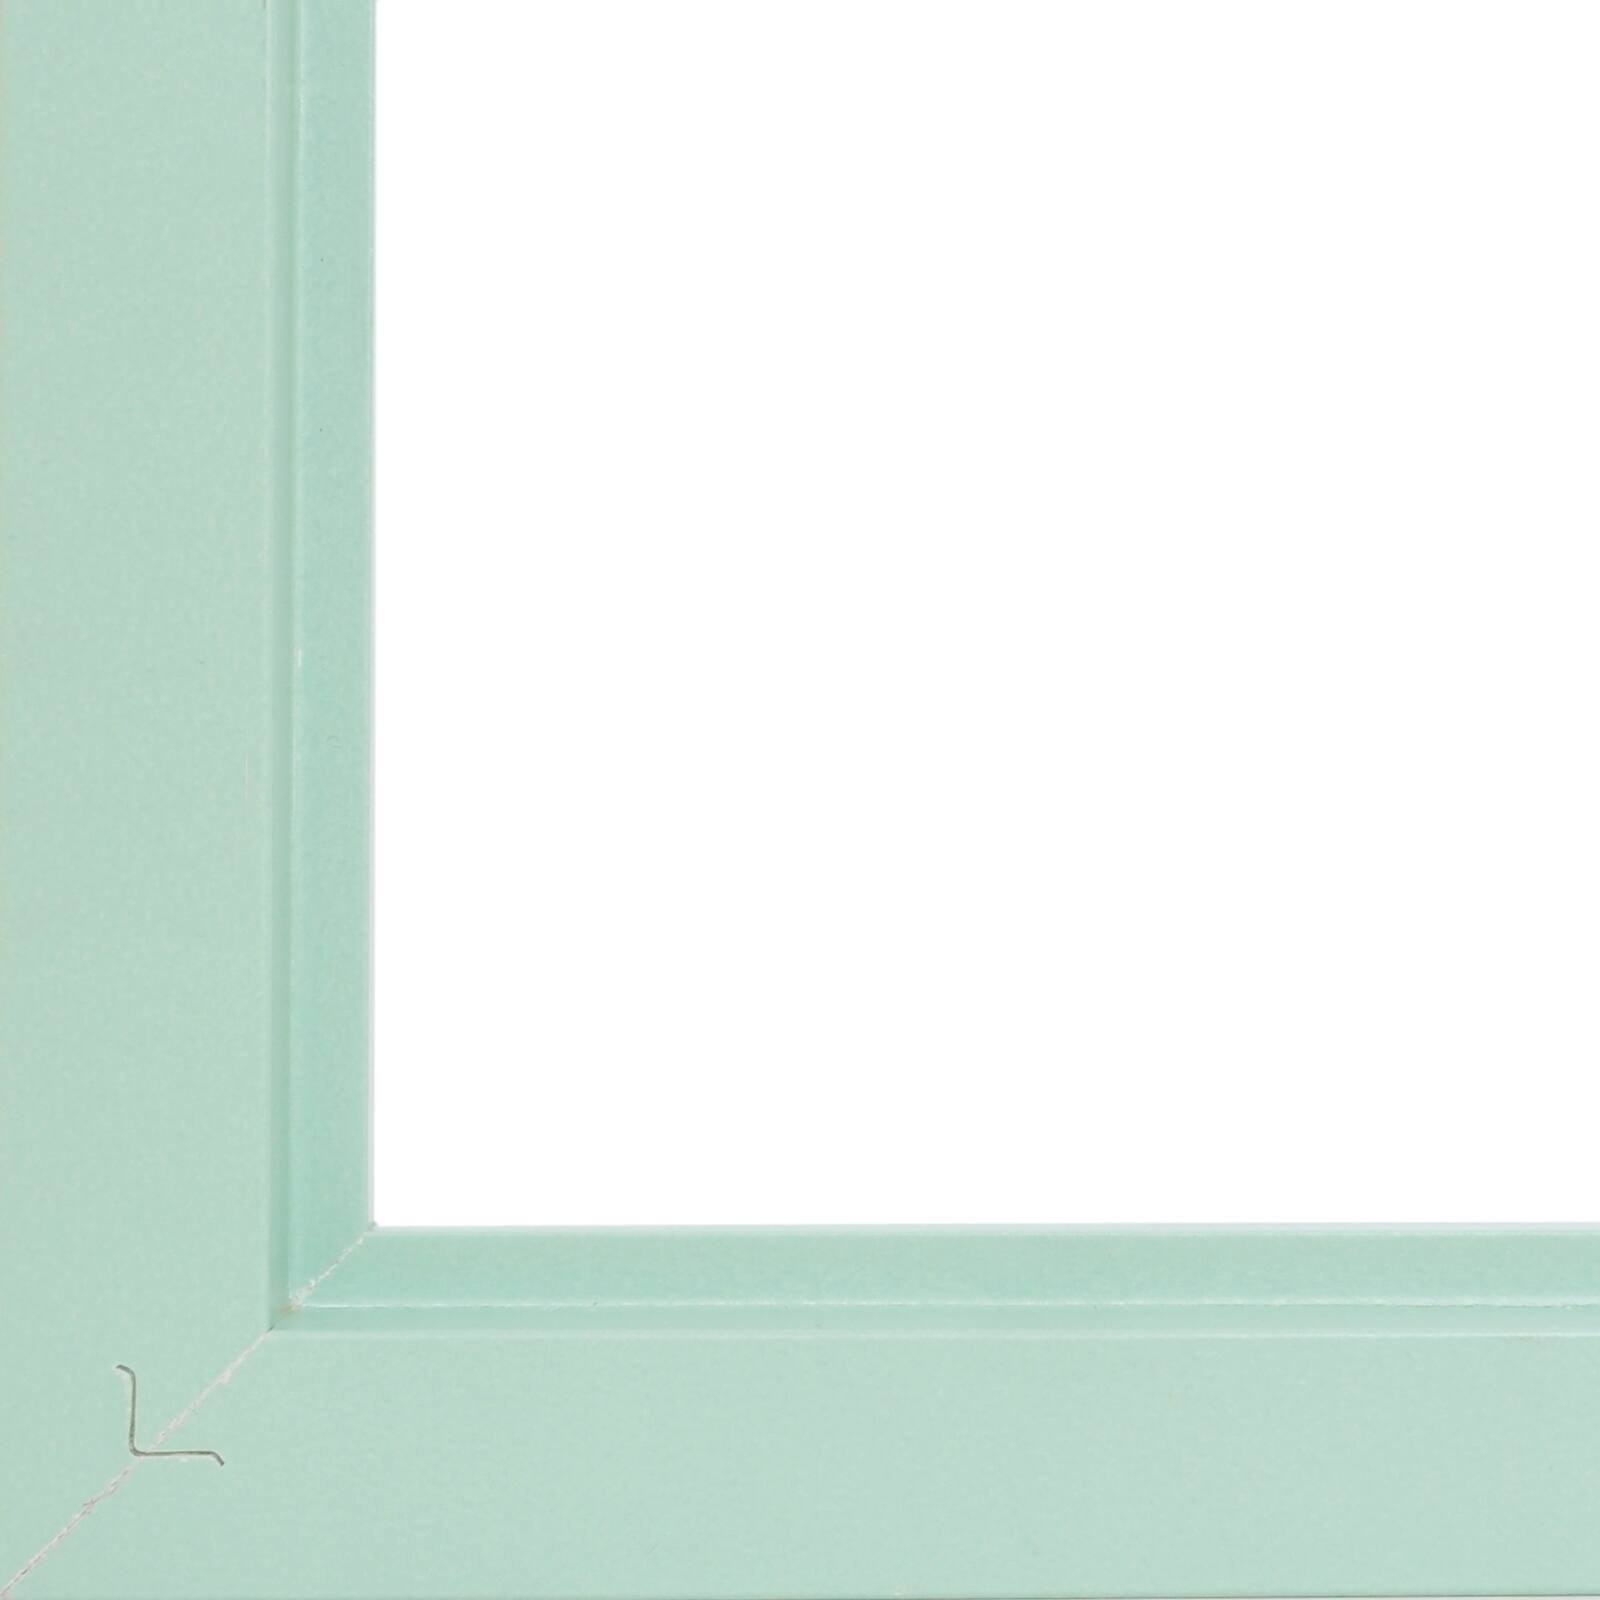 Sage Frame with Mat, Belmont by Studio D&#xE9;cor&#xAE;